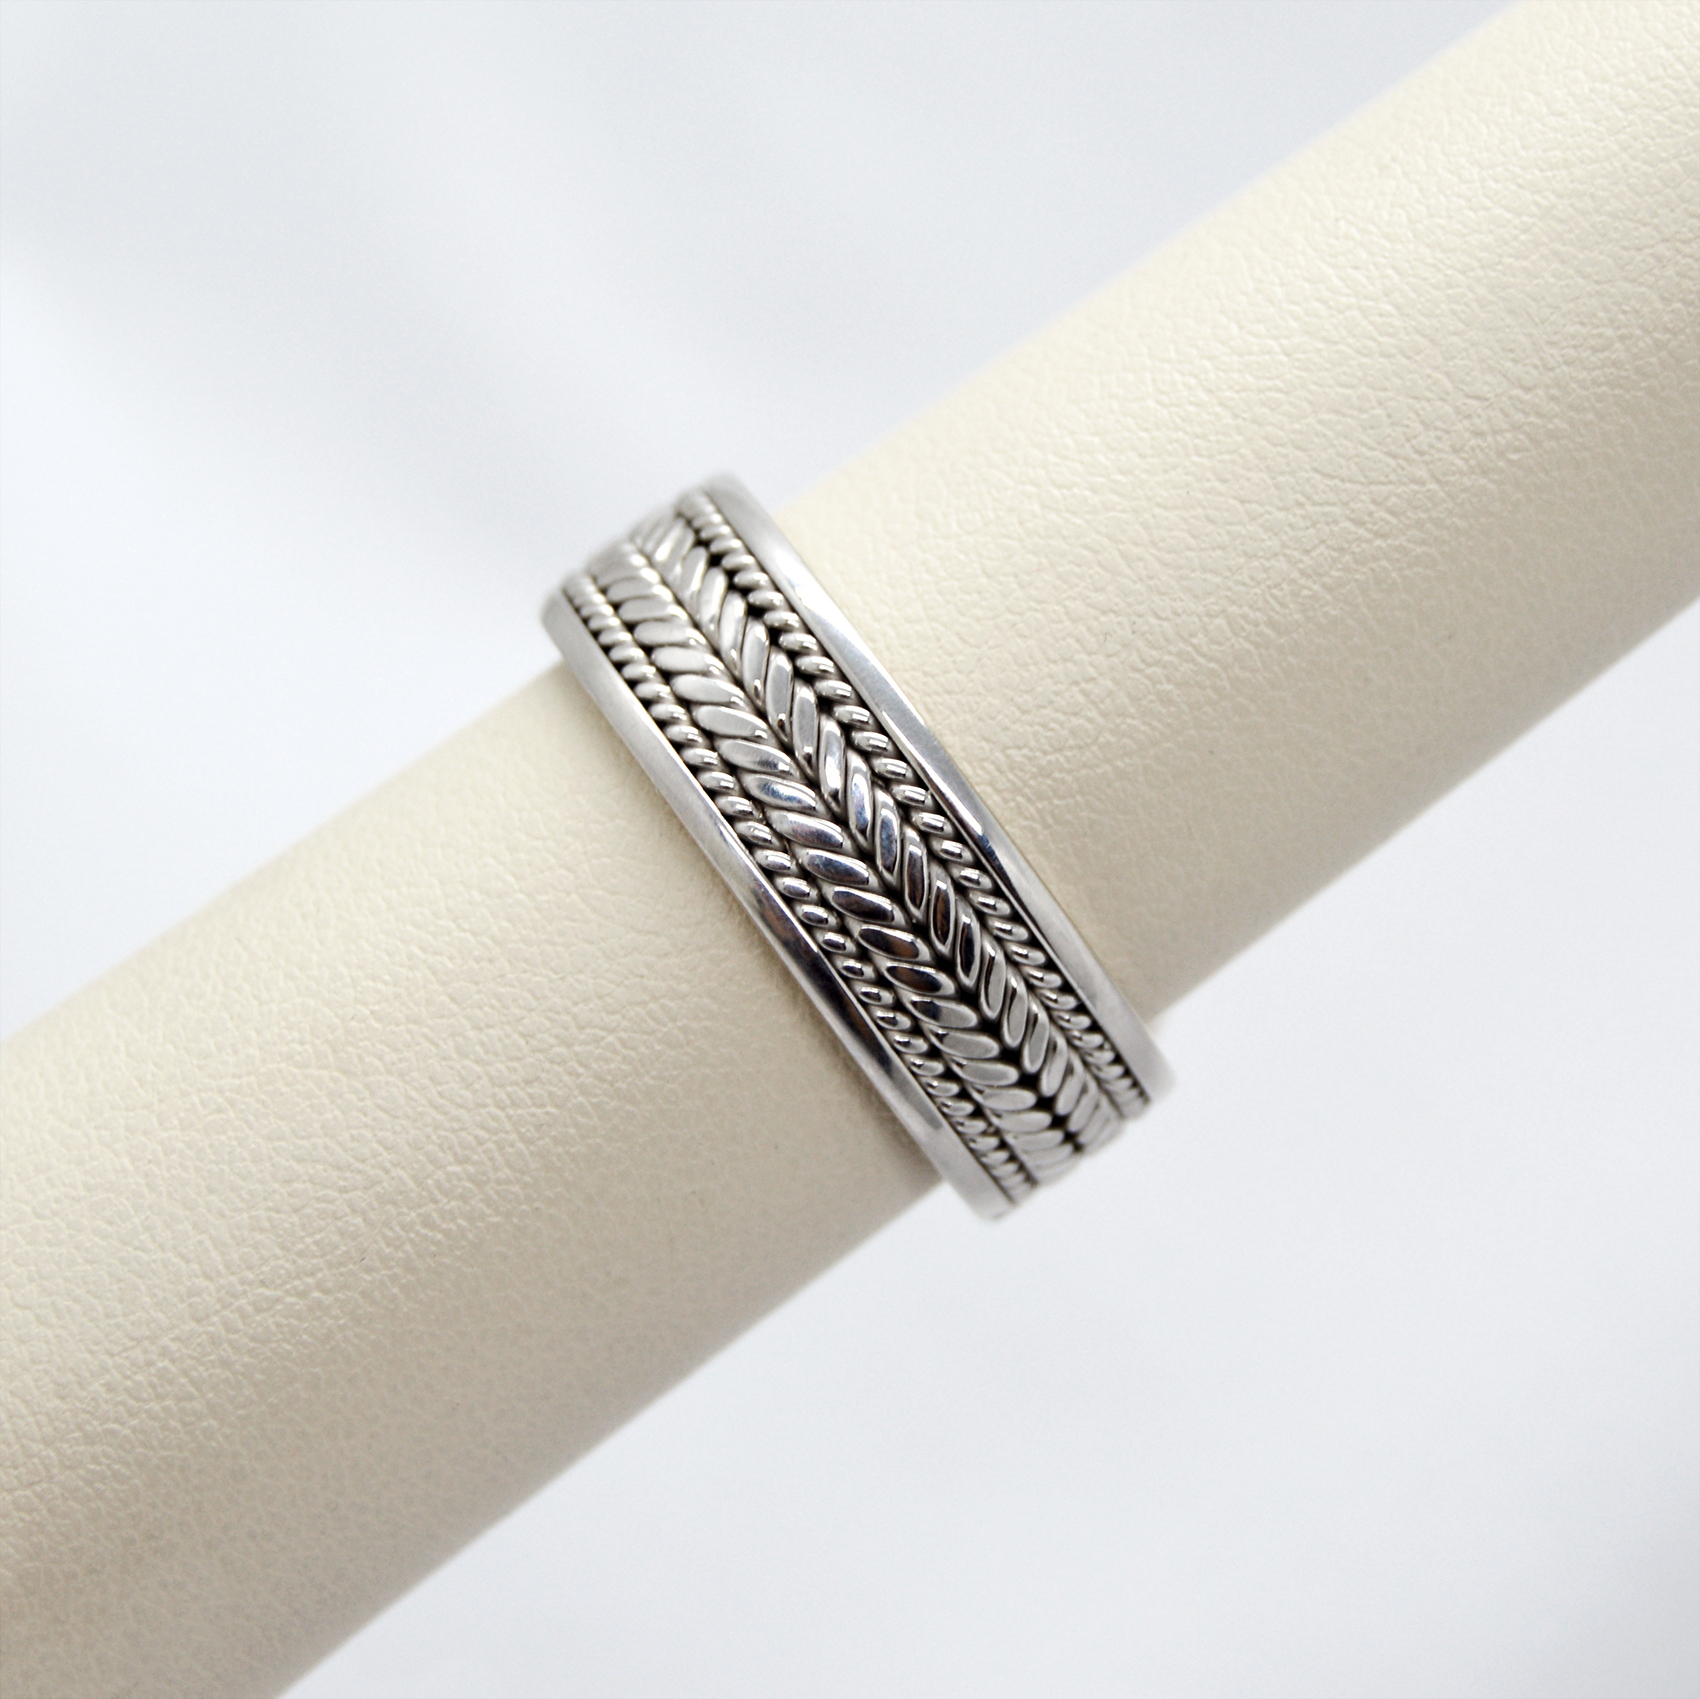 Braided Band in 14Kt White Gold - Morgan's Treasure